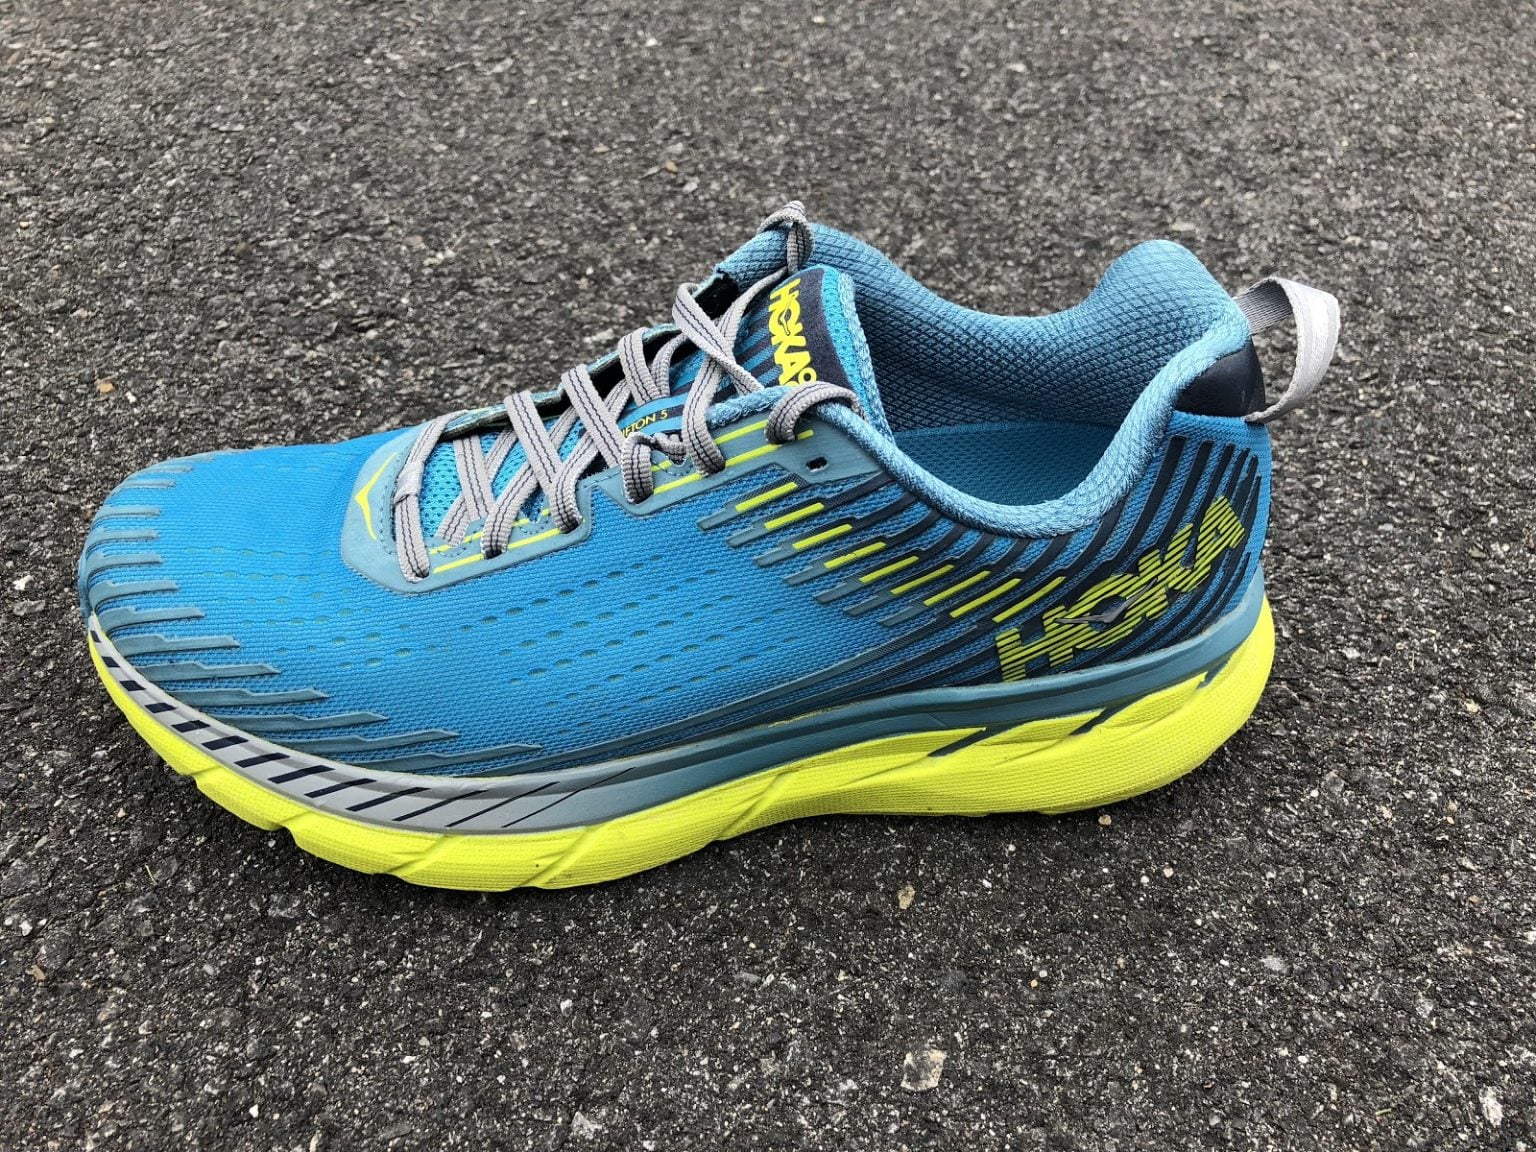 Hoka One One Clifton 5 Men’s Running Shoe Review -The Reliable Triathlon